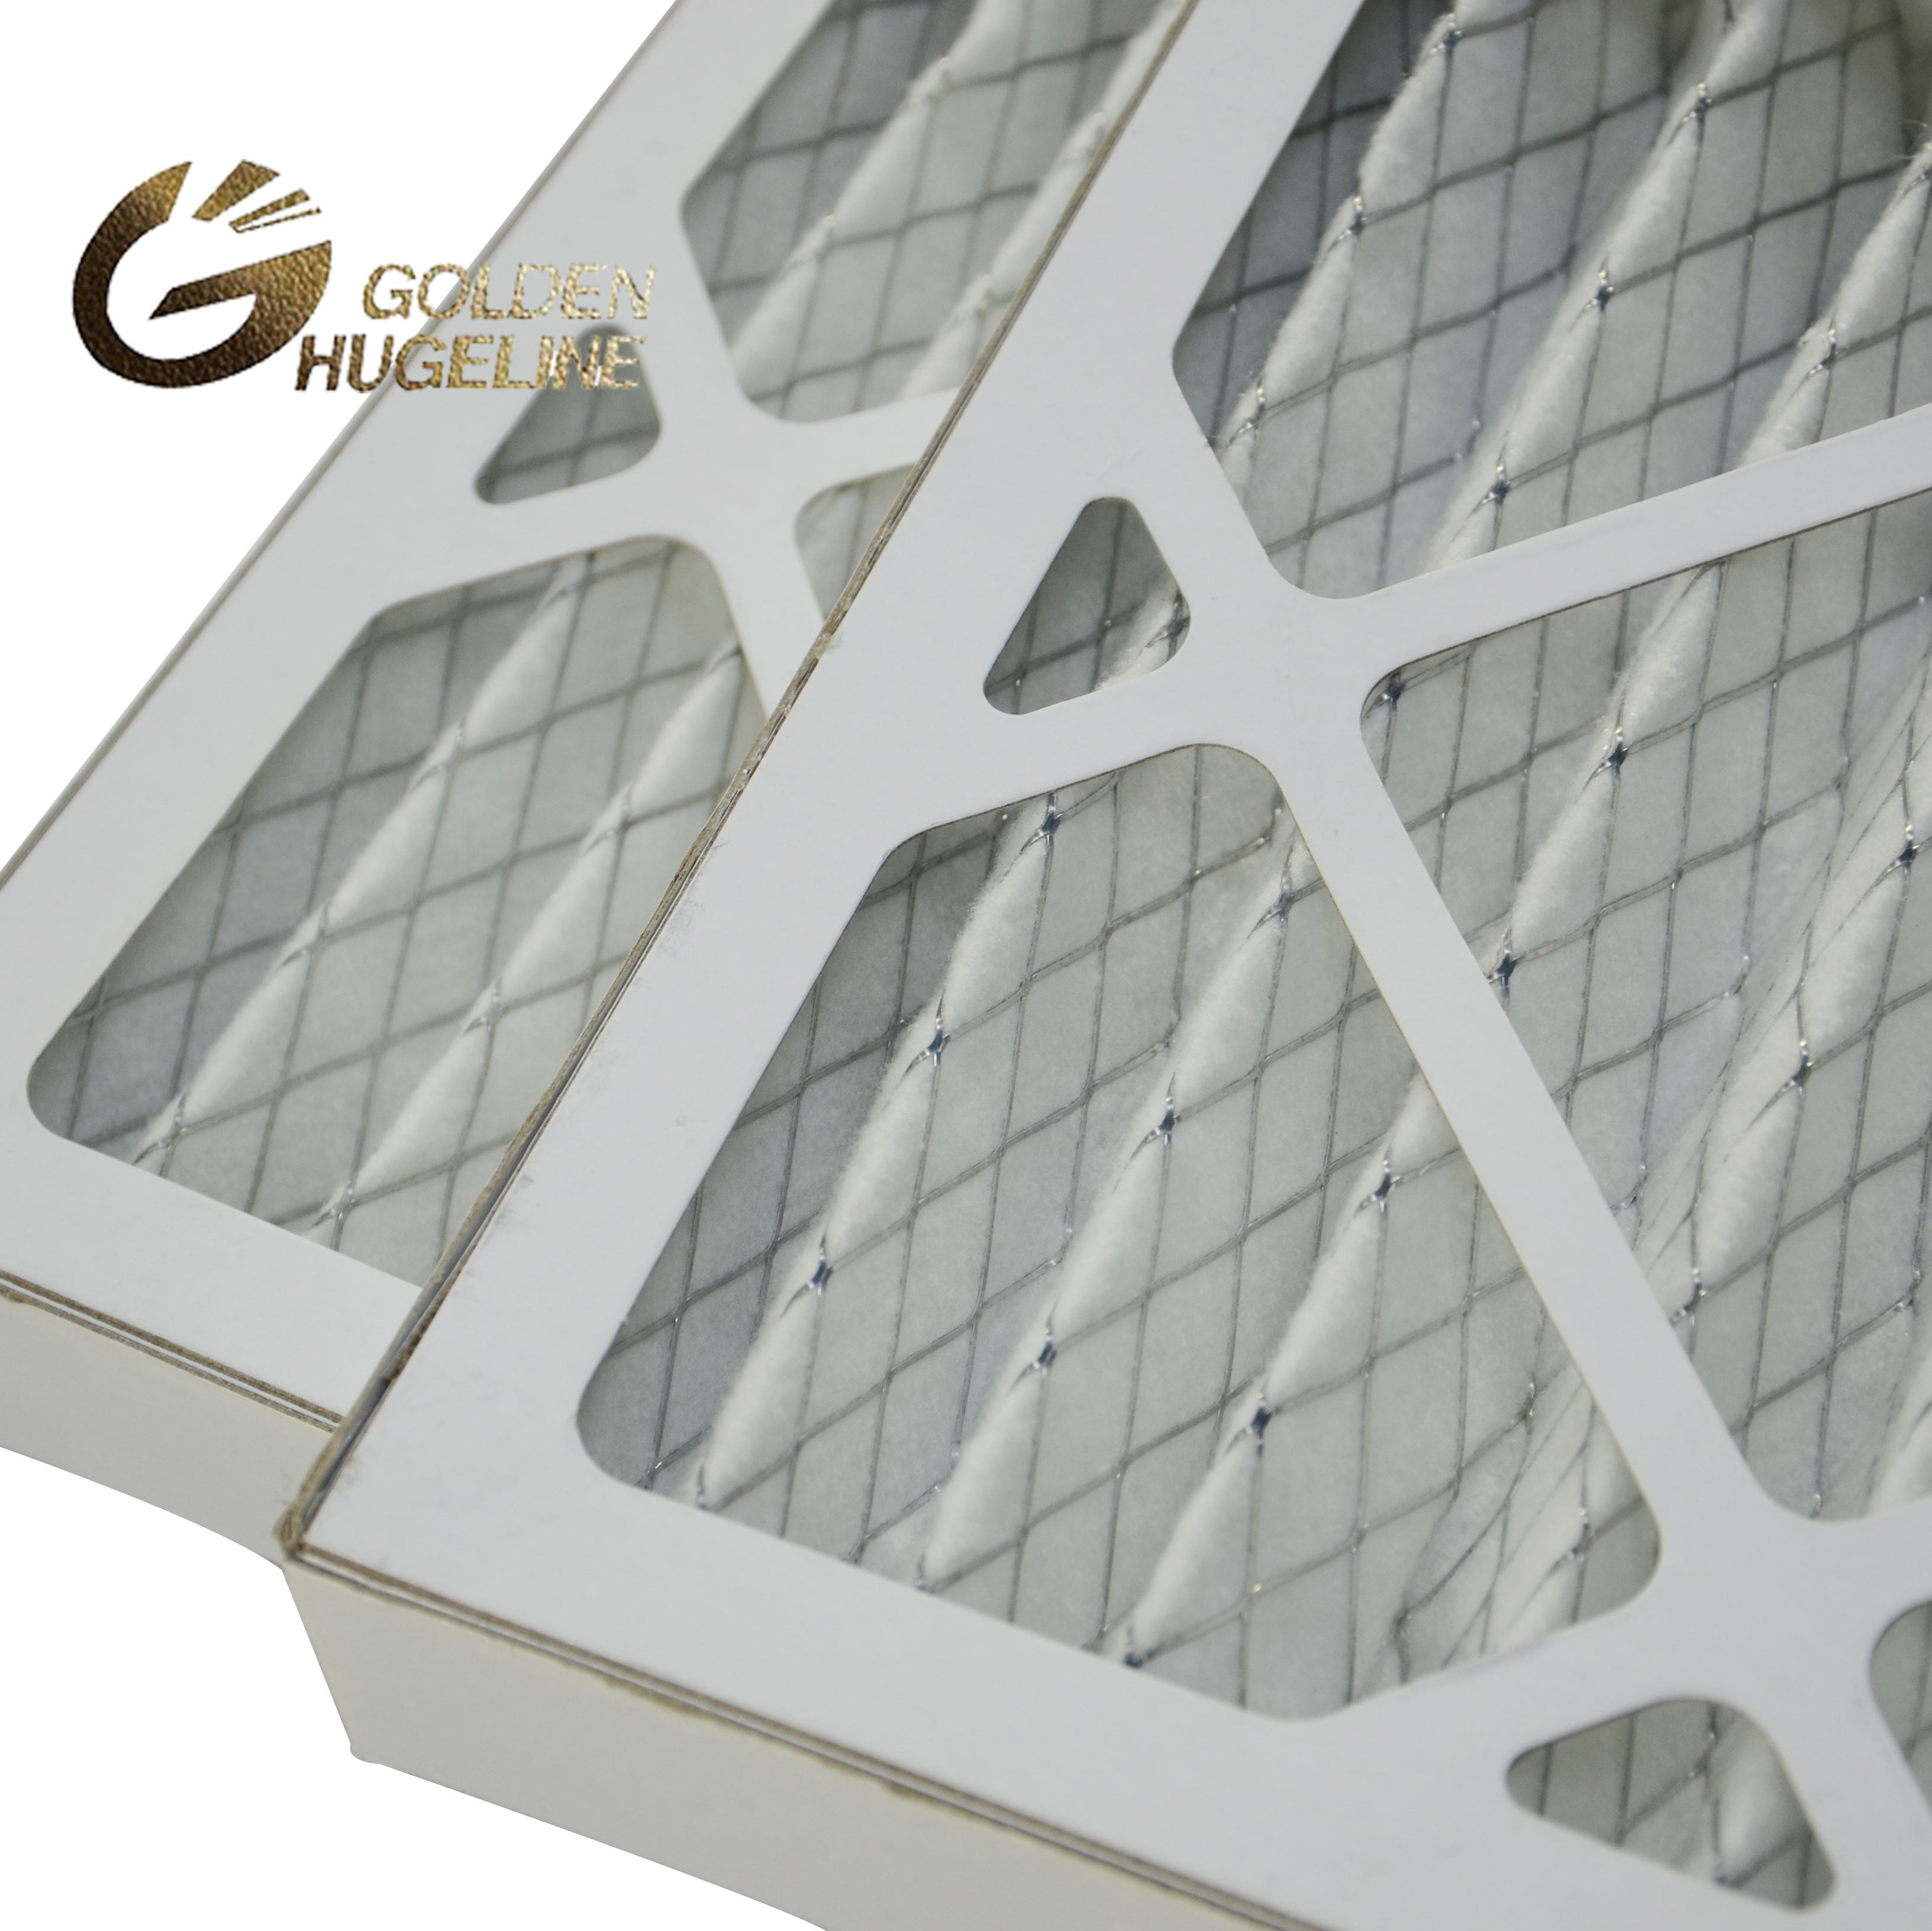 G4 filter, G4 pre-filter - All industrial manufacturers